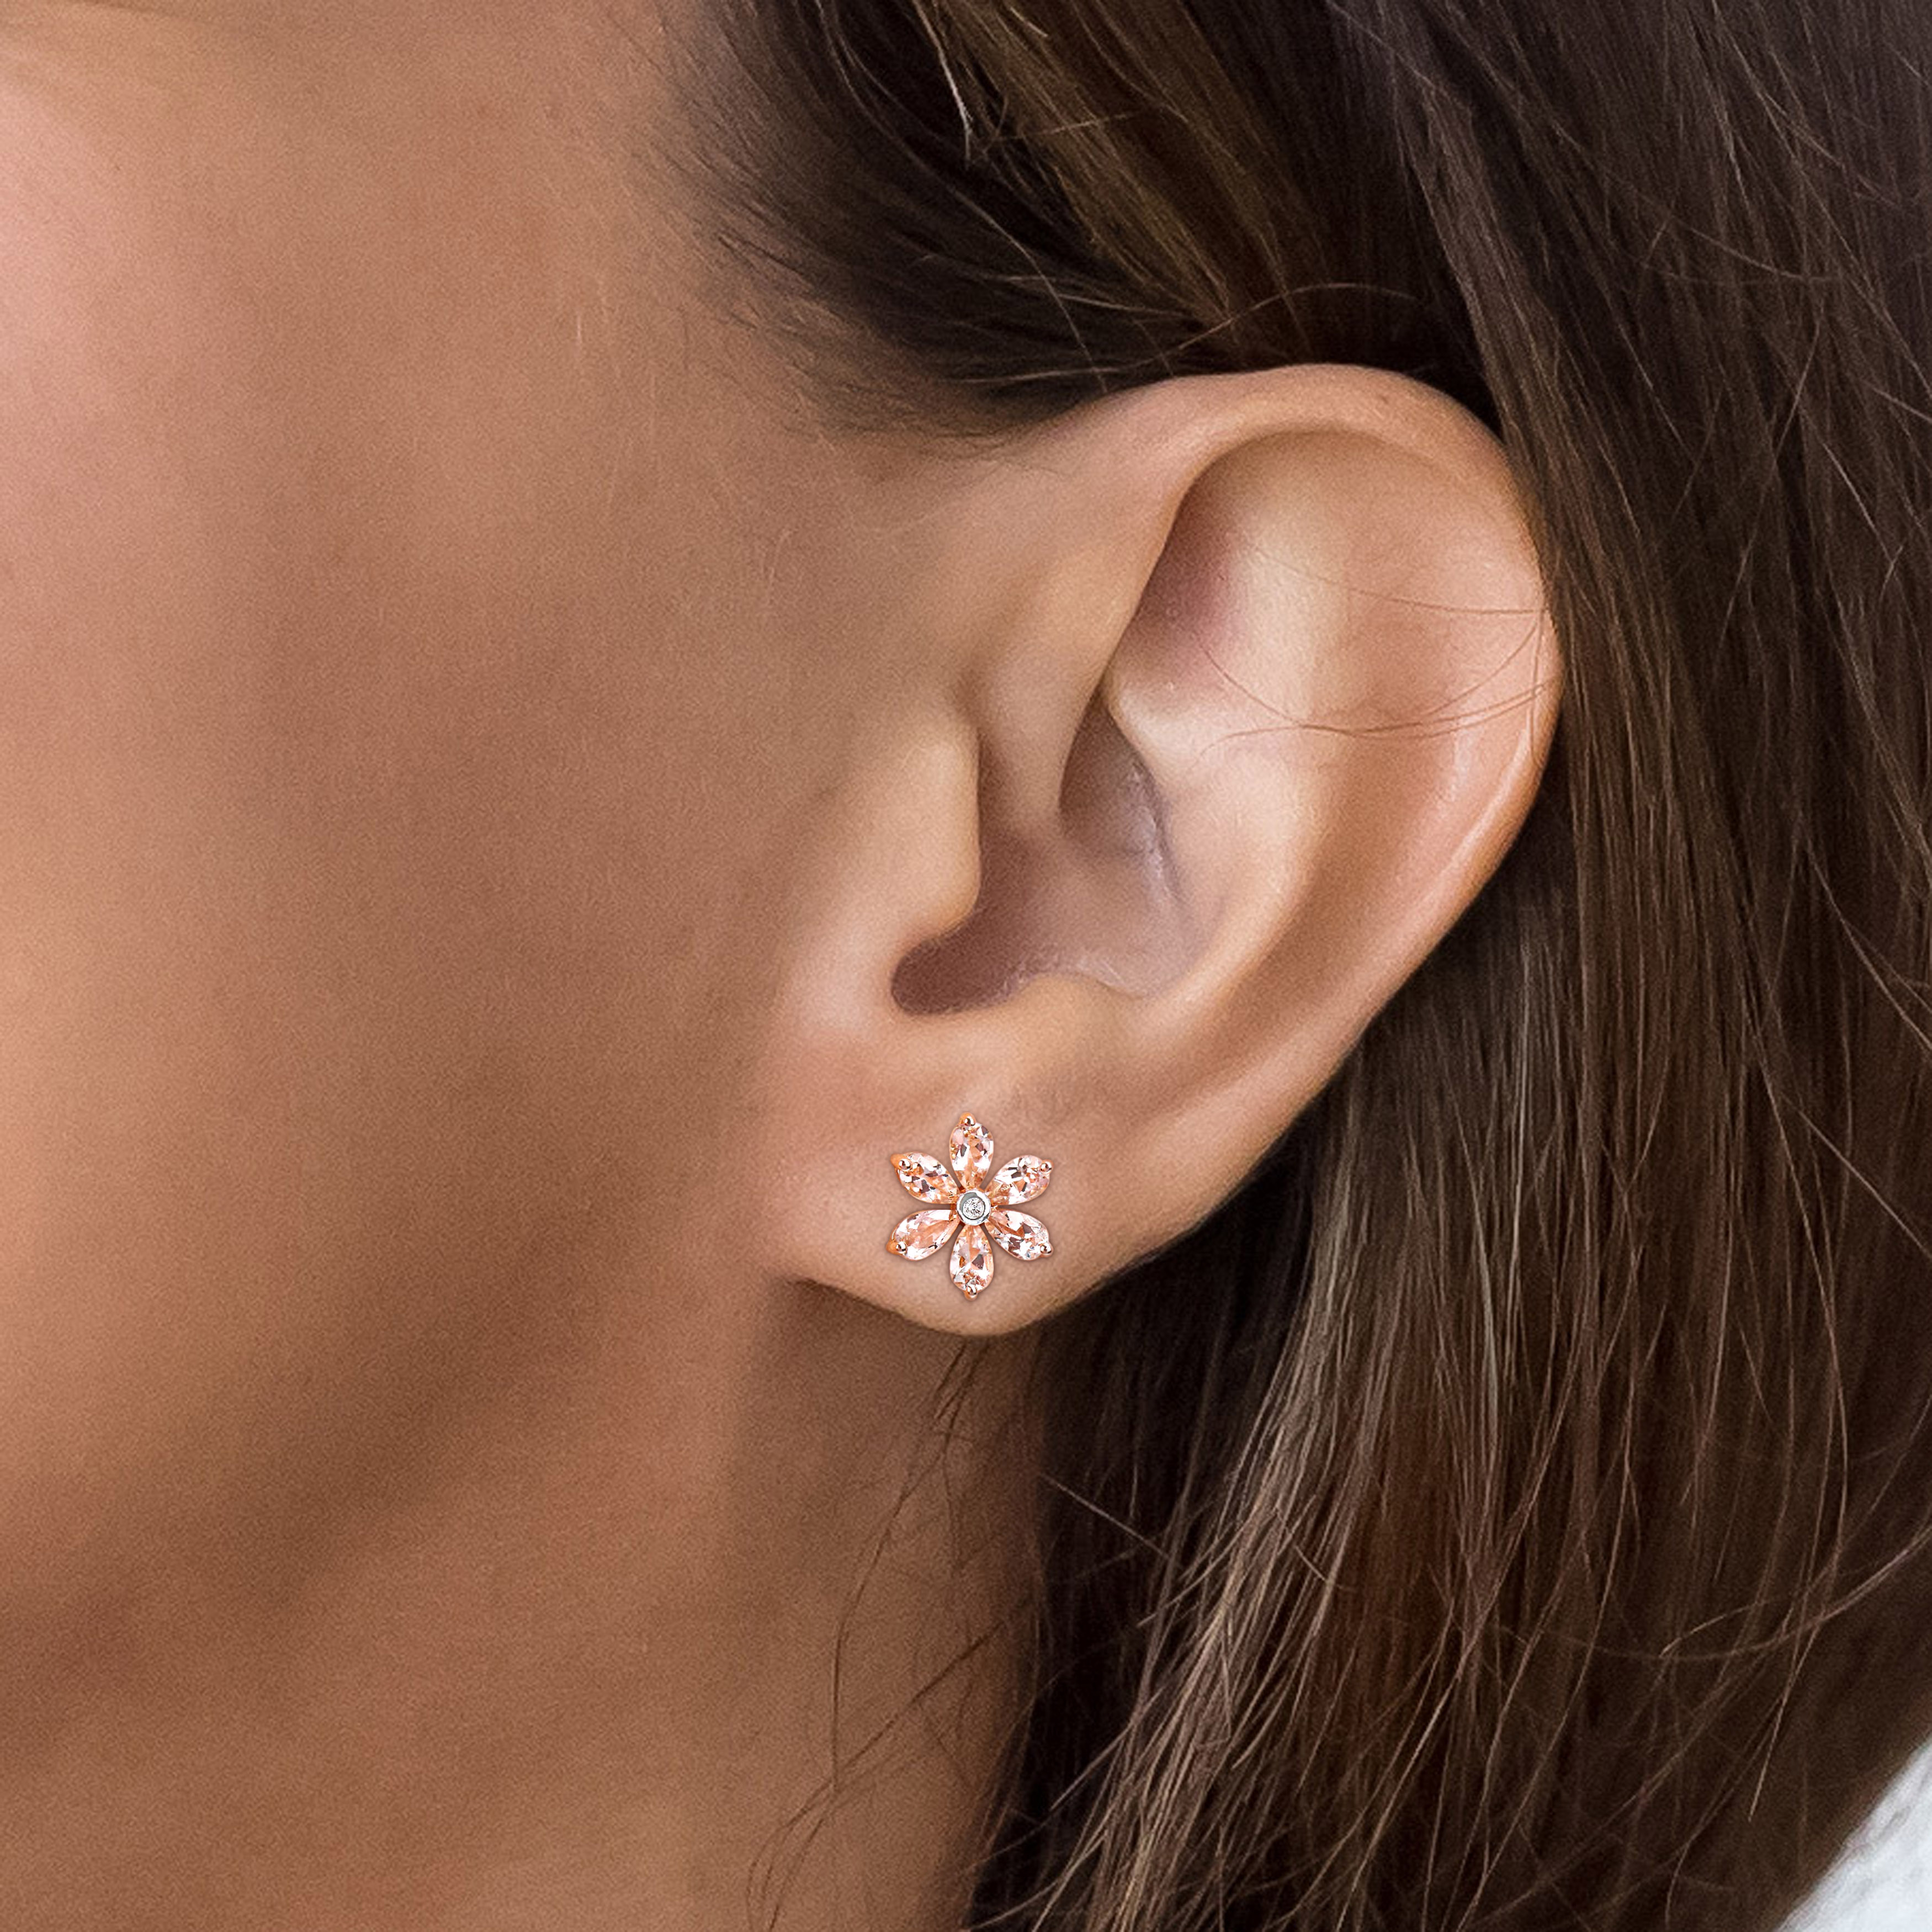 3 CT TGW Morganite and Diamond Accent Floral Stud Earrings in 10k Rose Gold